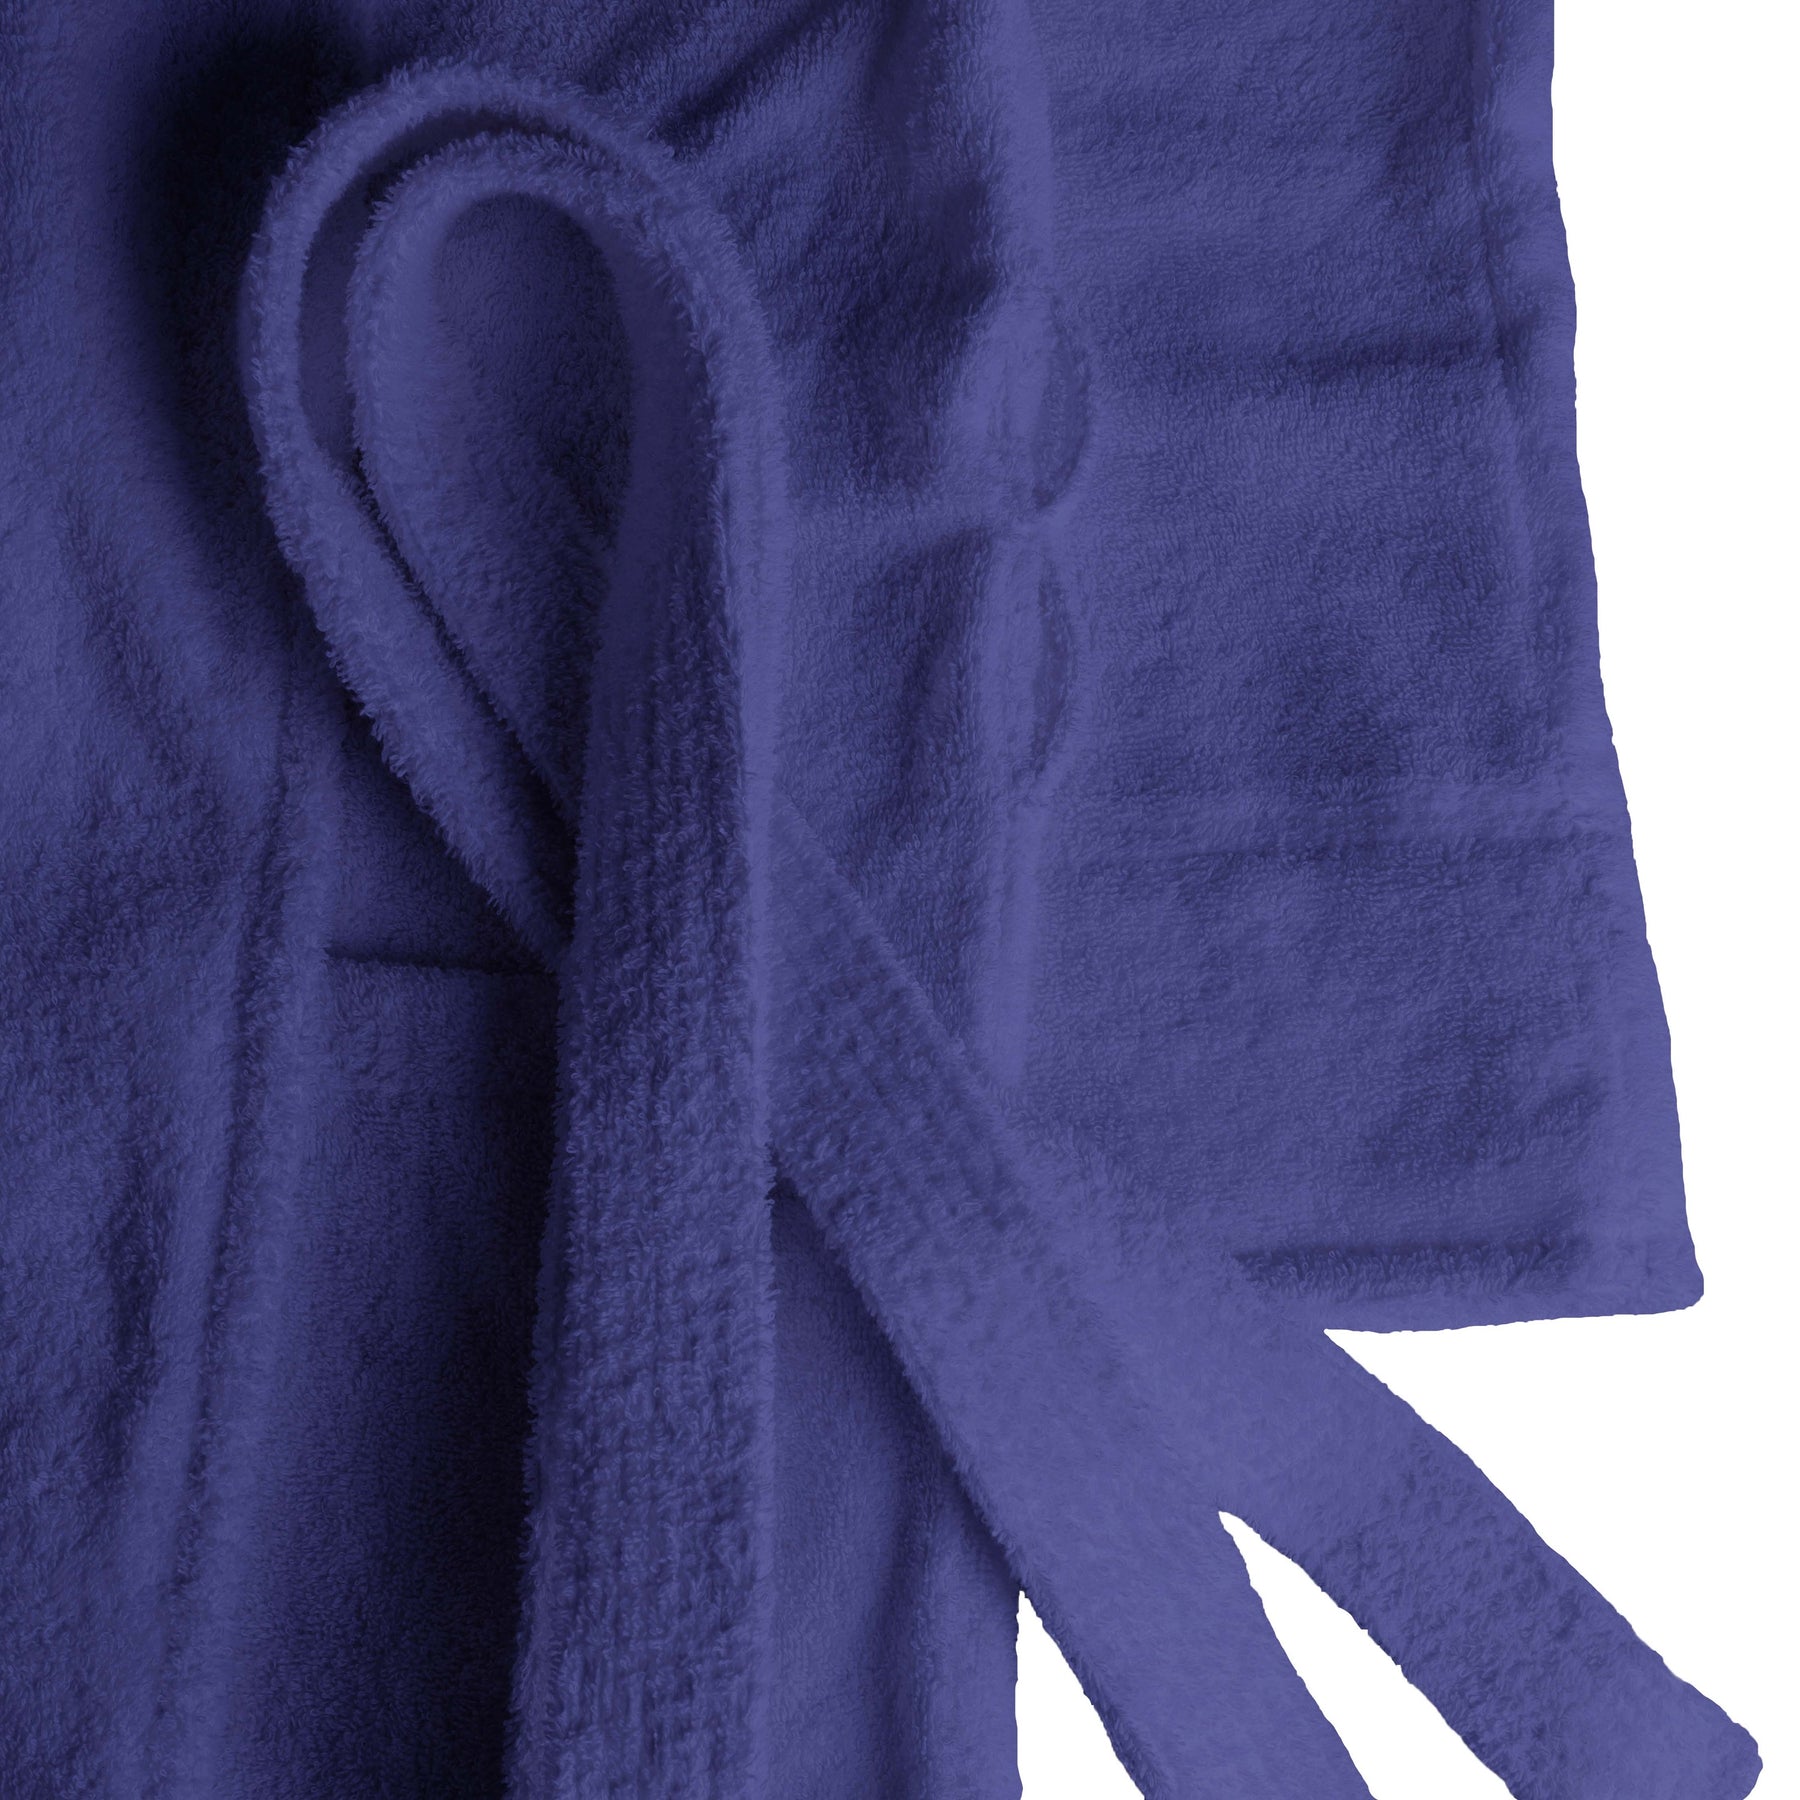 Classic Men's Home and Bath Collection Traditional Turkish Cotton Cozy Bathrobe with Adjustable Belt and Hanging Loop - Navy Blue